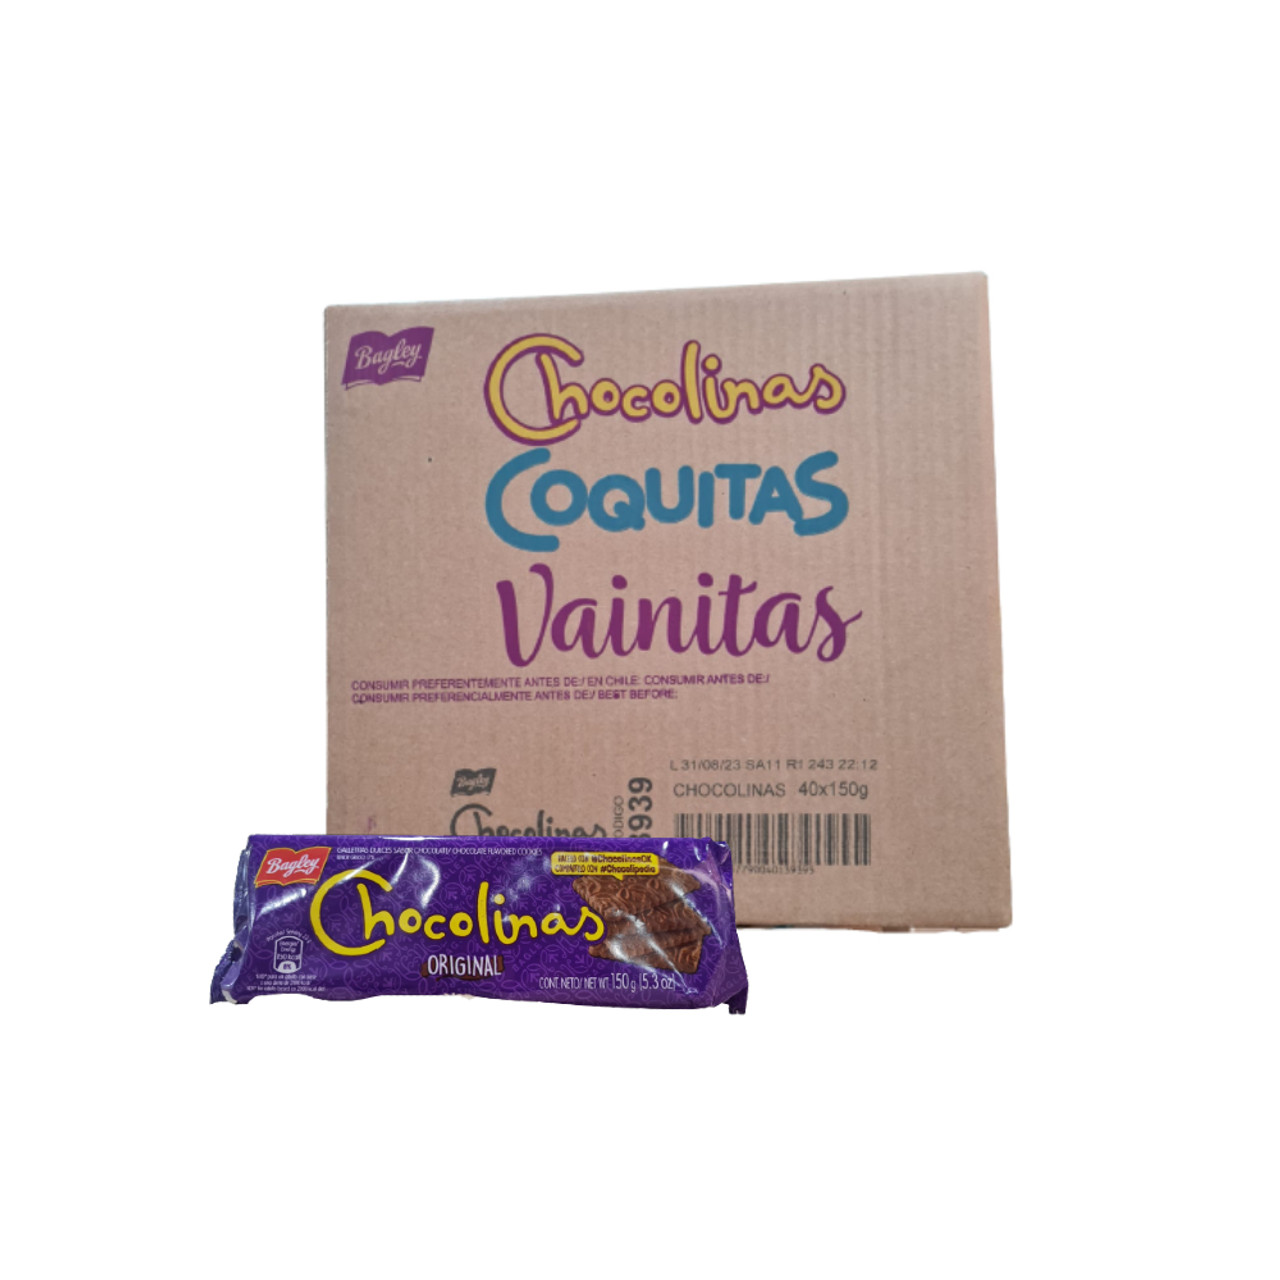 Compra productos argentinos online - Pampa Direct